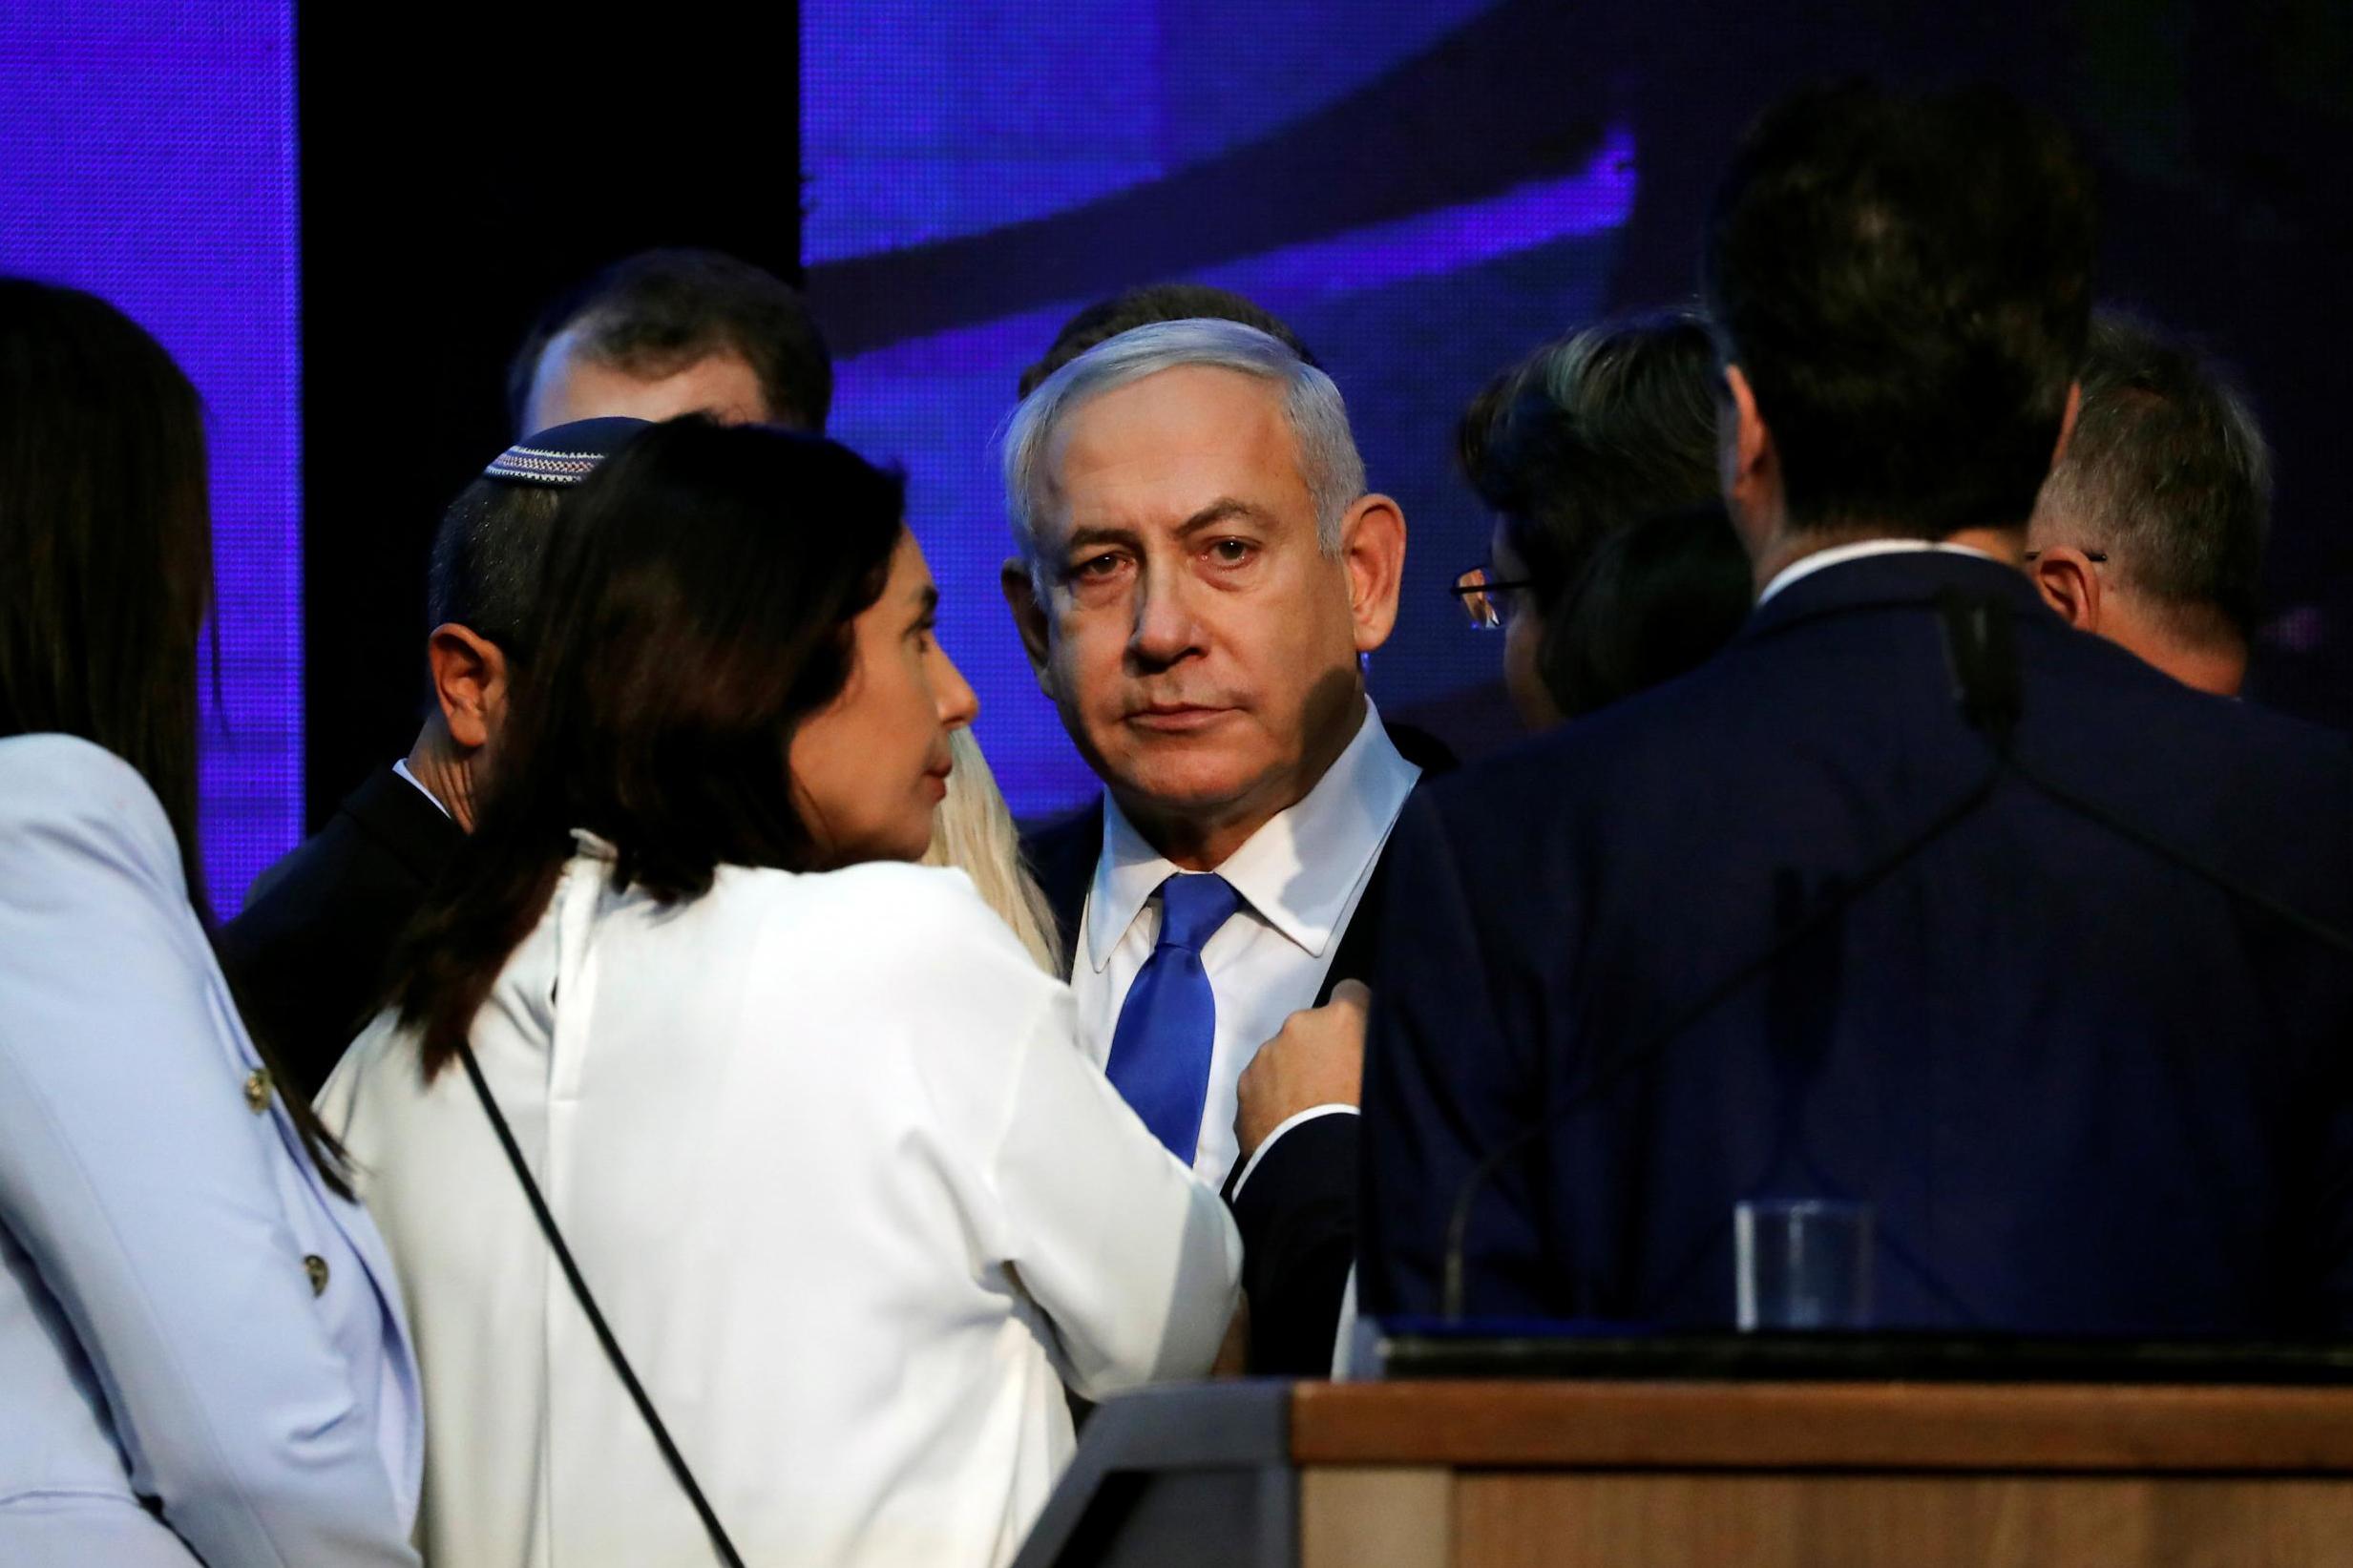 The Israeli prime minister spoke to supporters at his Likud party headquarters after the announcement of exit polls in Tel Aviv